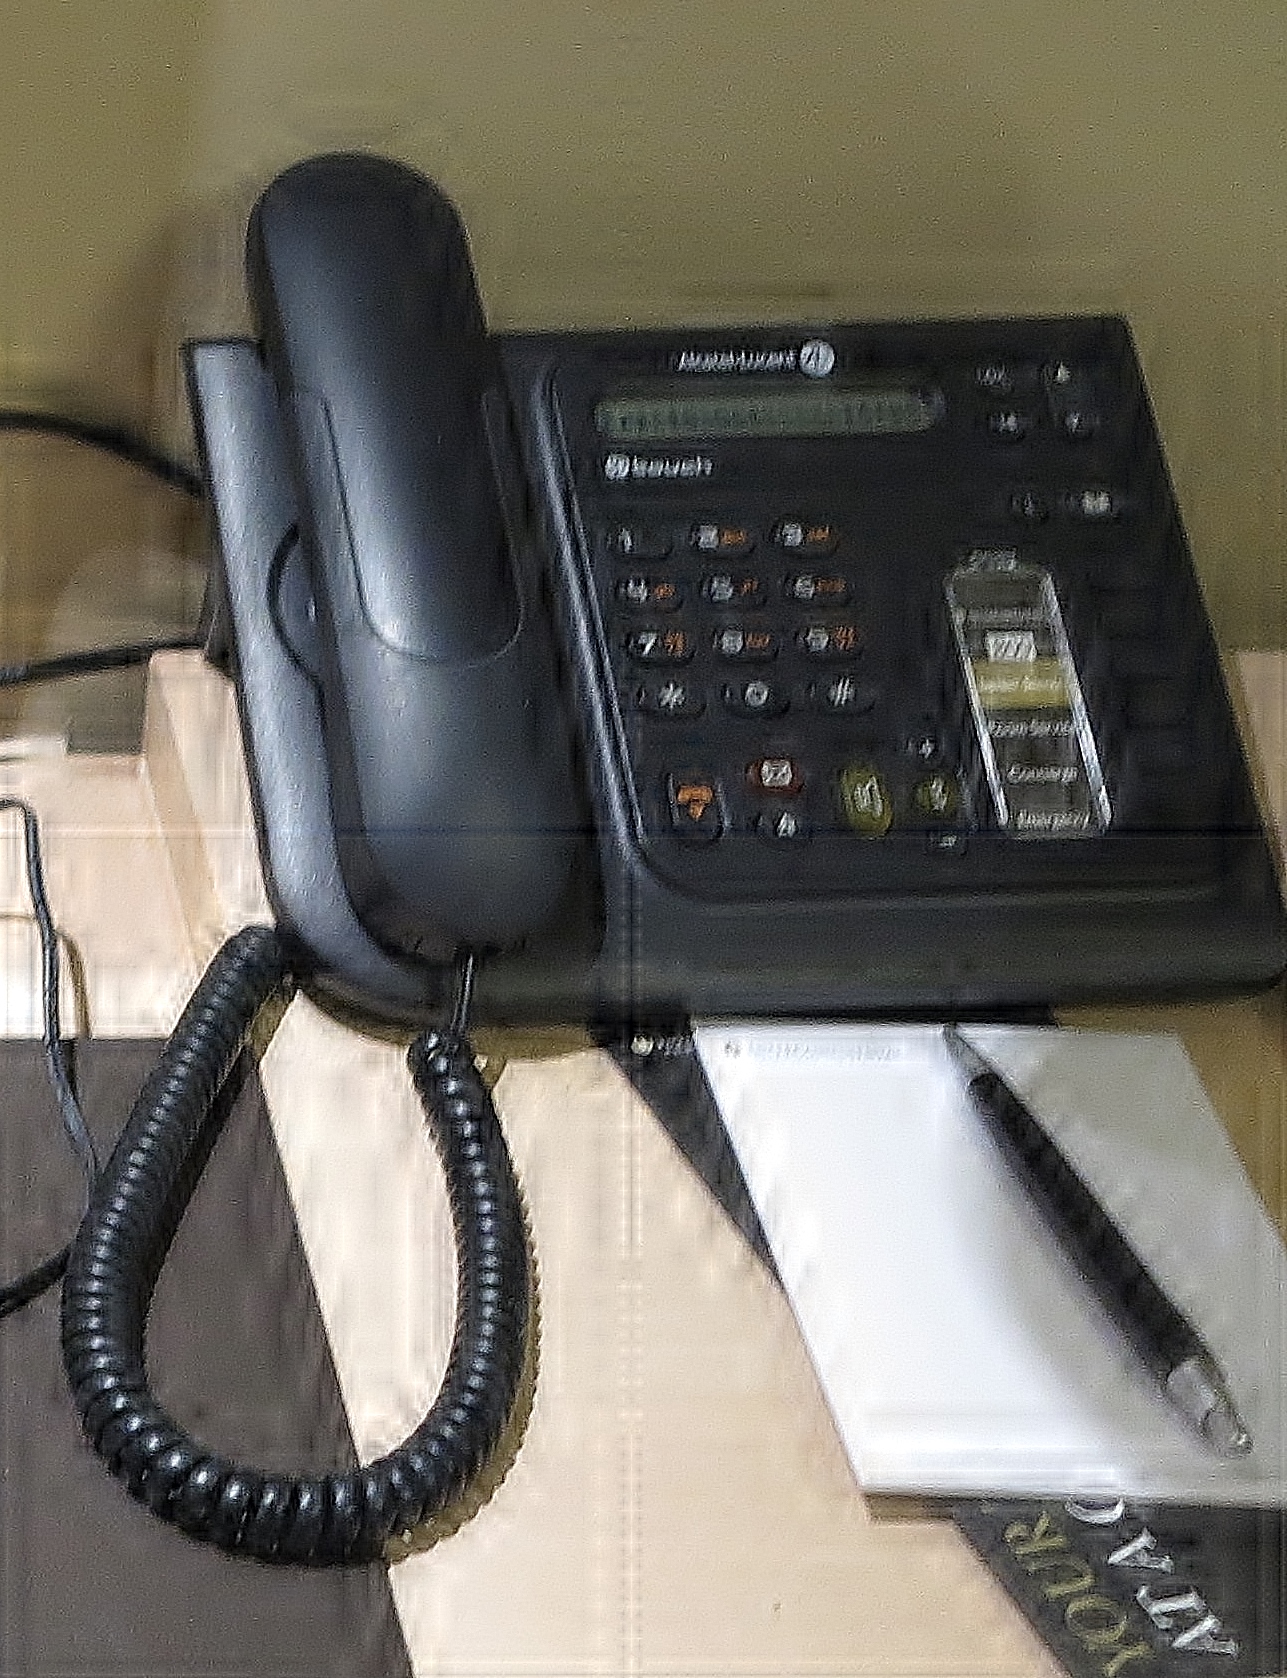 Hotel guestroom phones expected to integrate with our devices